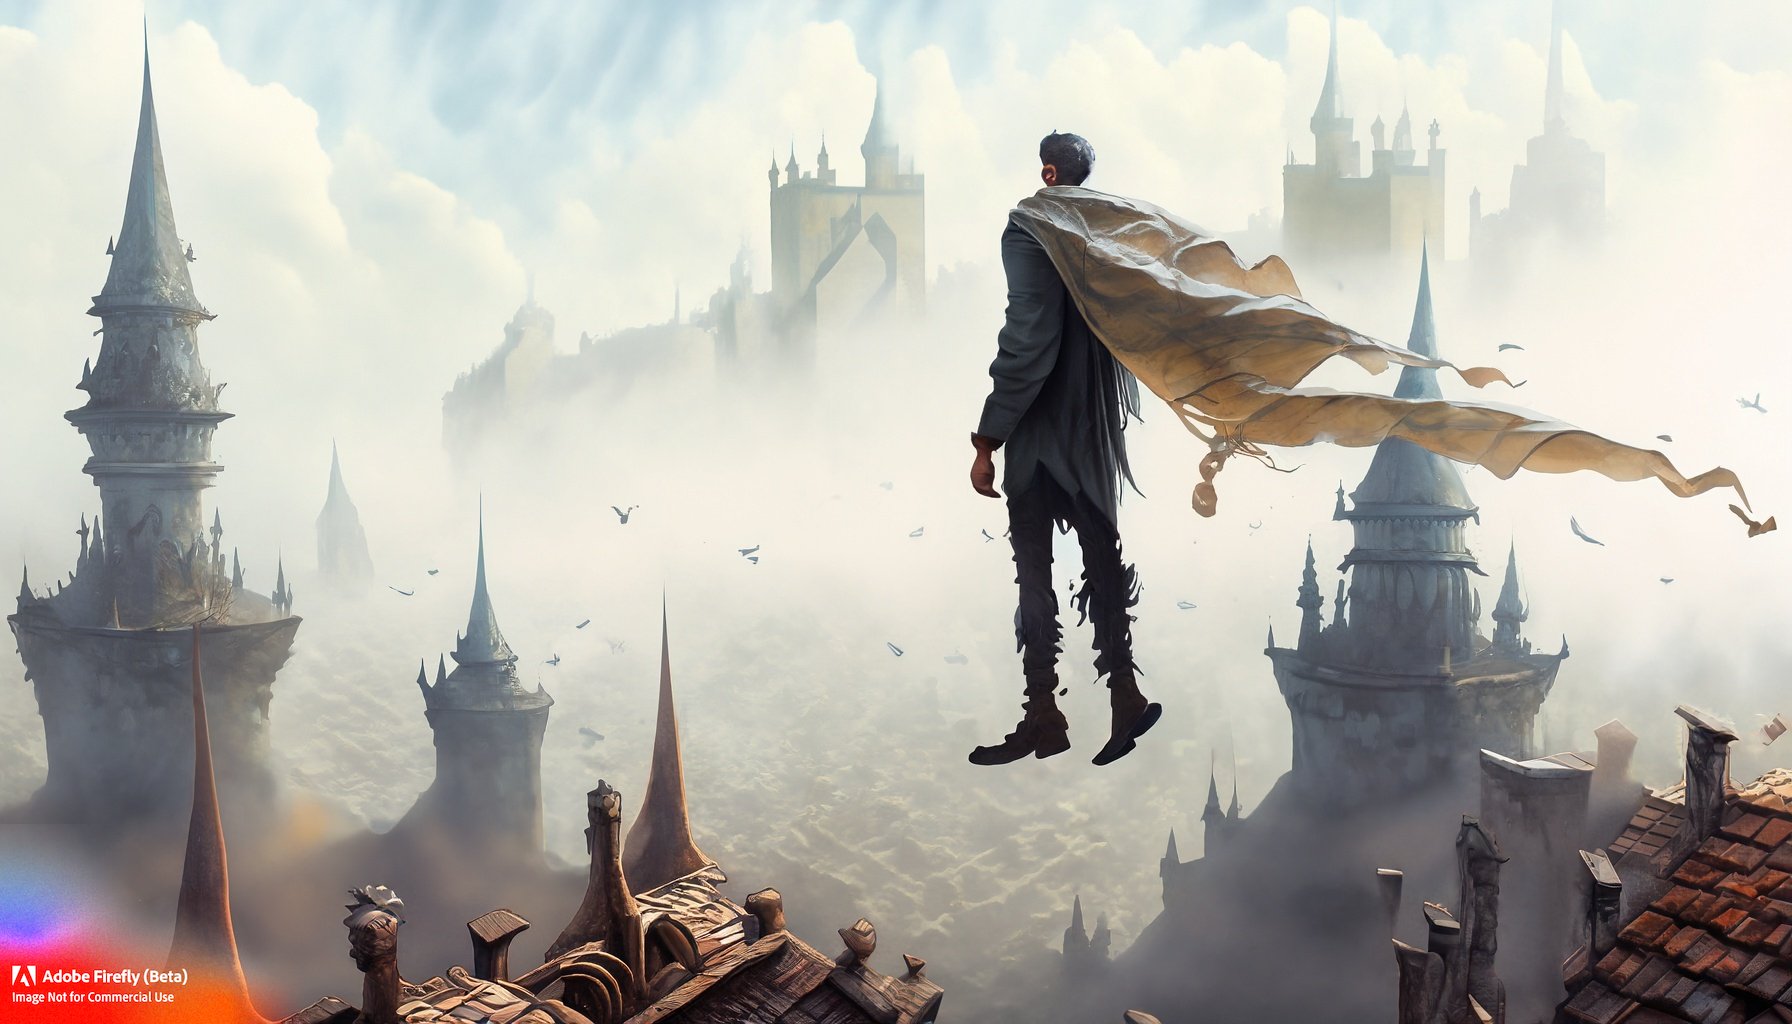 Firefly_mist+and fog, person in a cape of ribbons flying over ancient city rooftops, coins, a castle with many spires_art,wide_angle,fantasy_52274.jpg